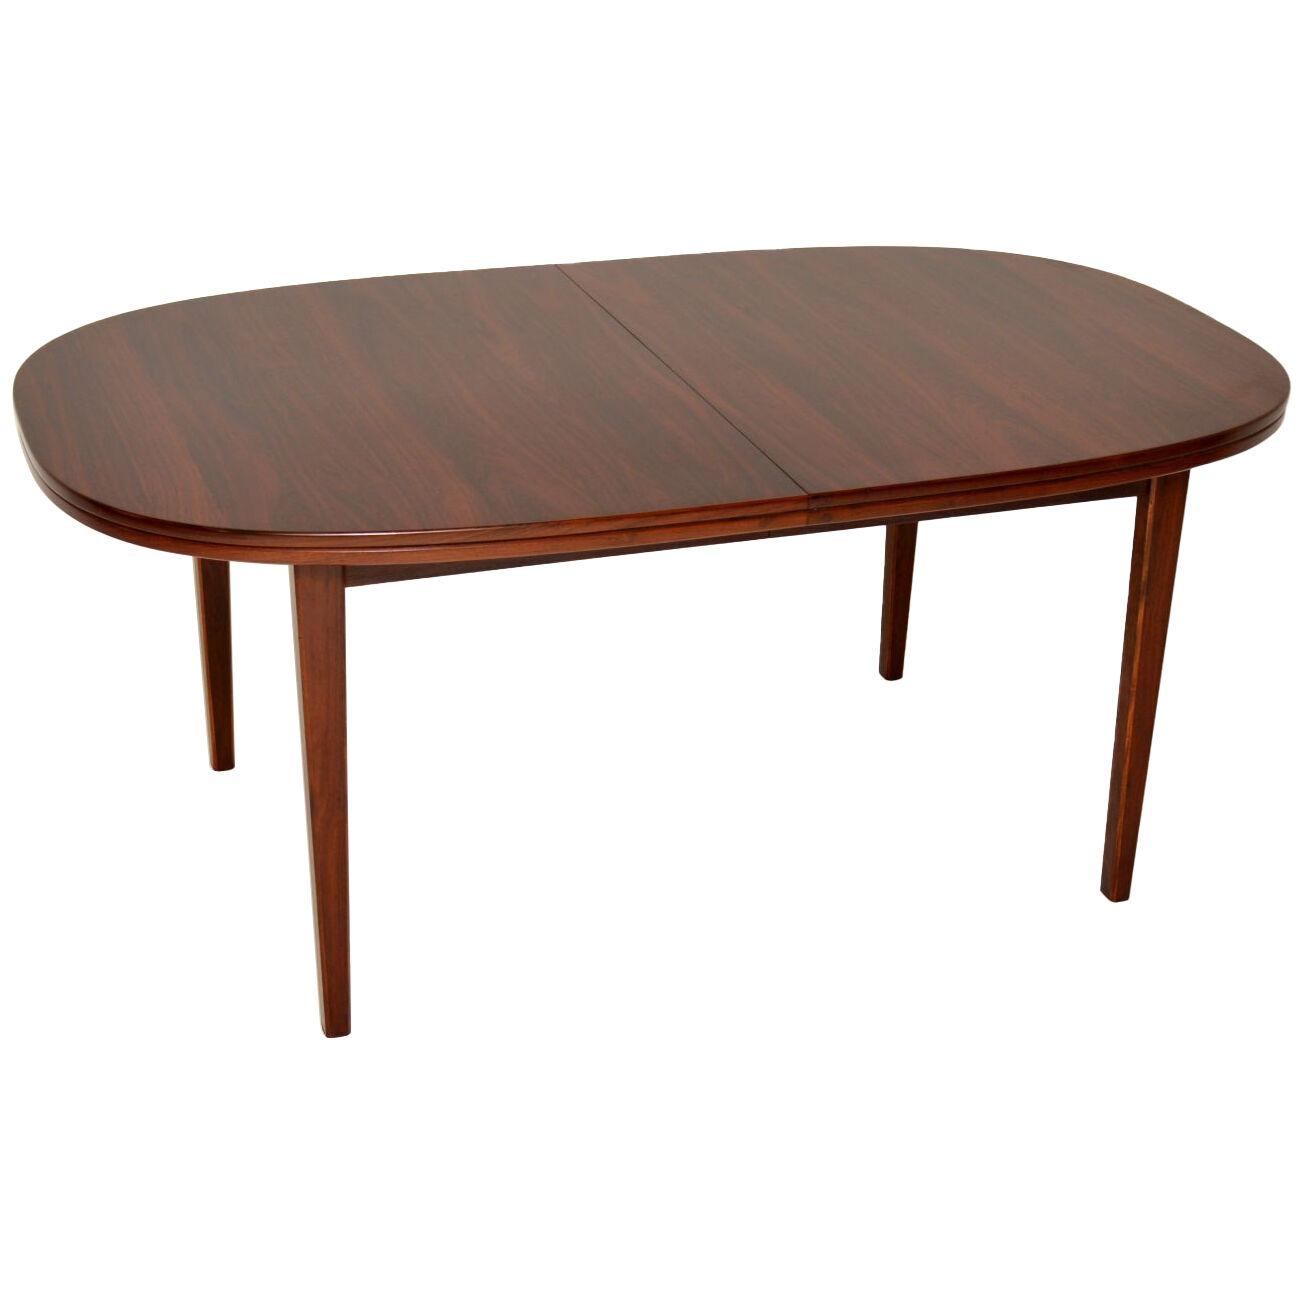 1960's Danish Rosewood Extending Dining Table